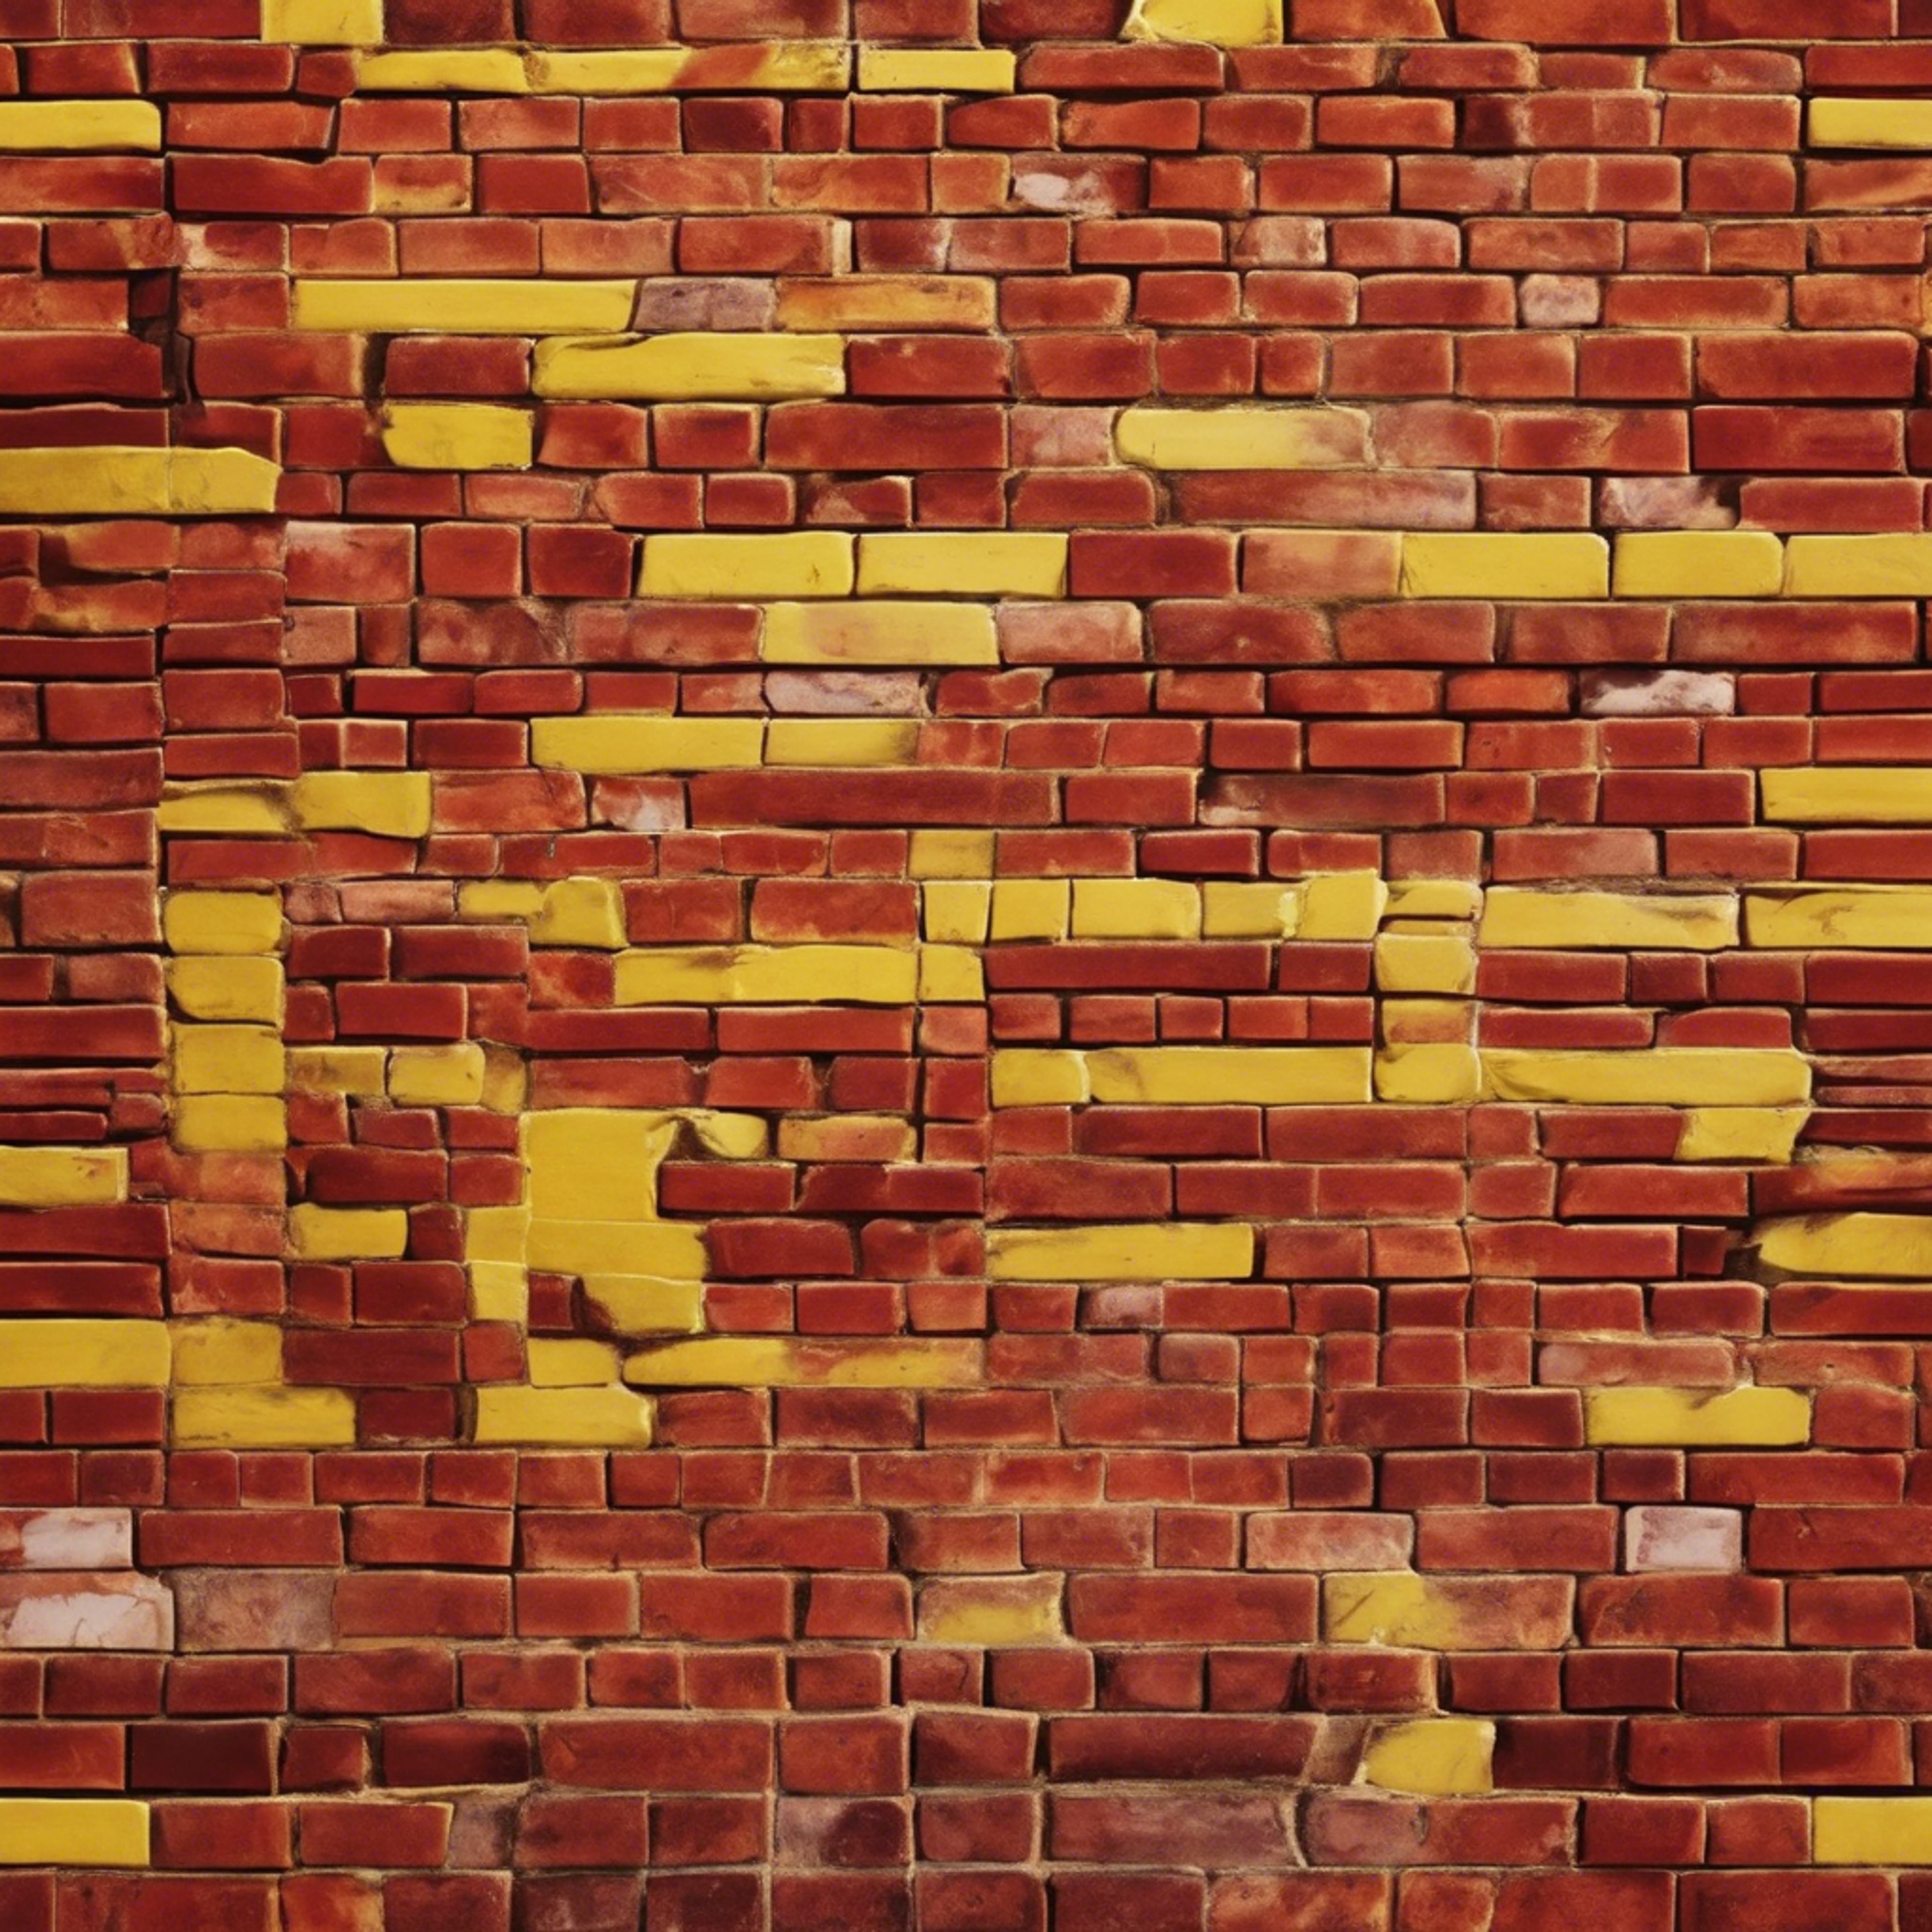 Red and yellow brick pattern seen through the illusion of a watery surface - the bricks appear slightly distorted yet colorful. Hintergrund[6ac5a5324f9a41fcbc3c]